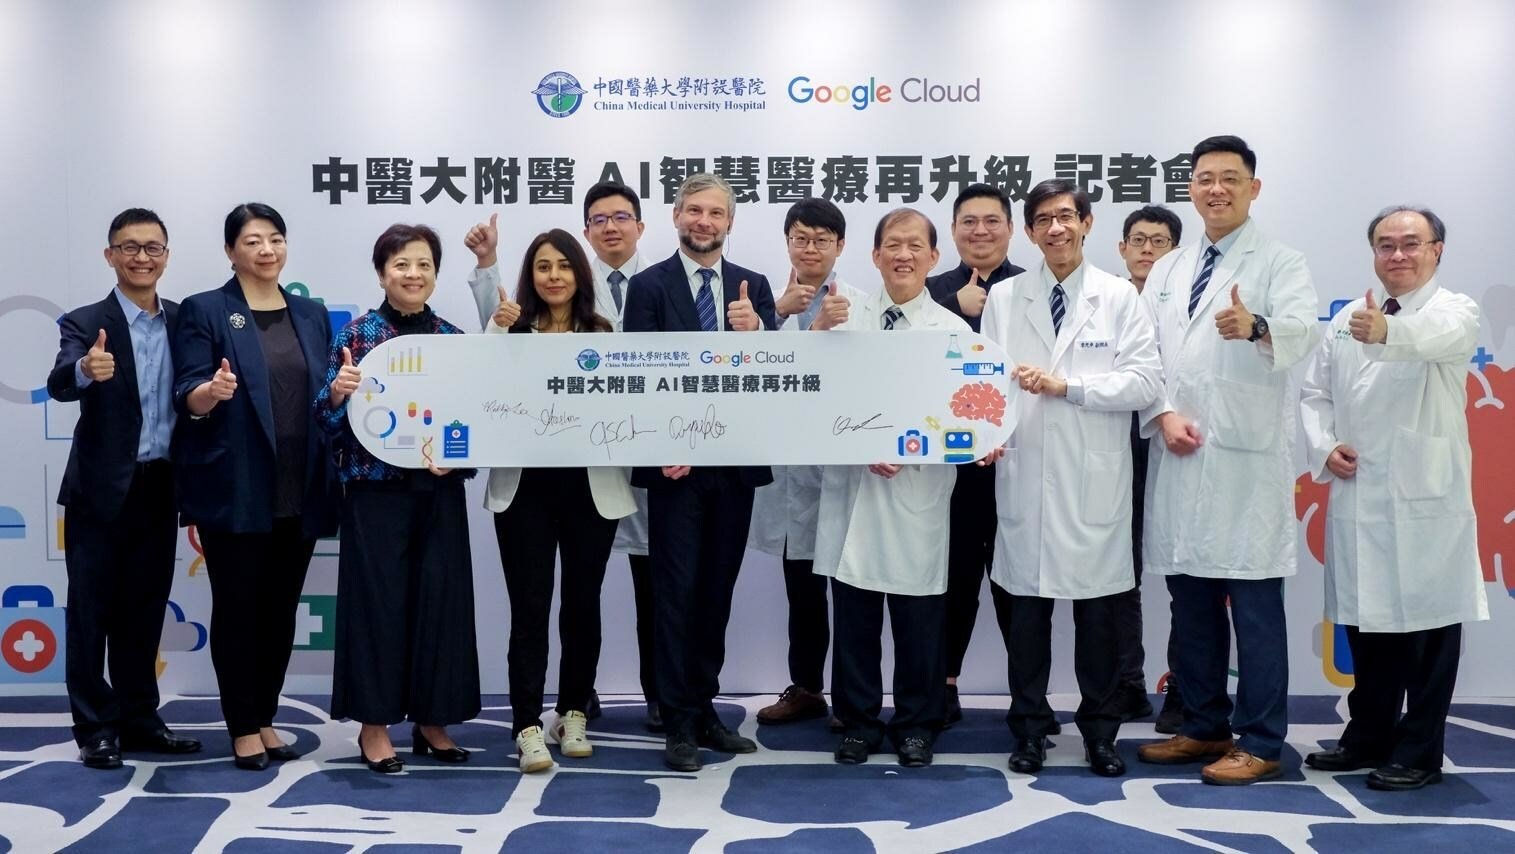 China Medical University Hospital leverages MedLM Gen AI to aid physicians